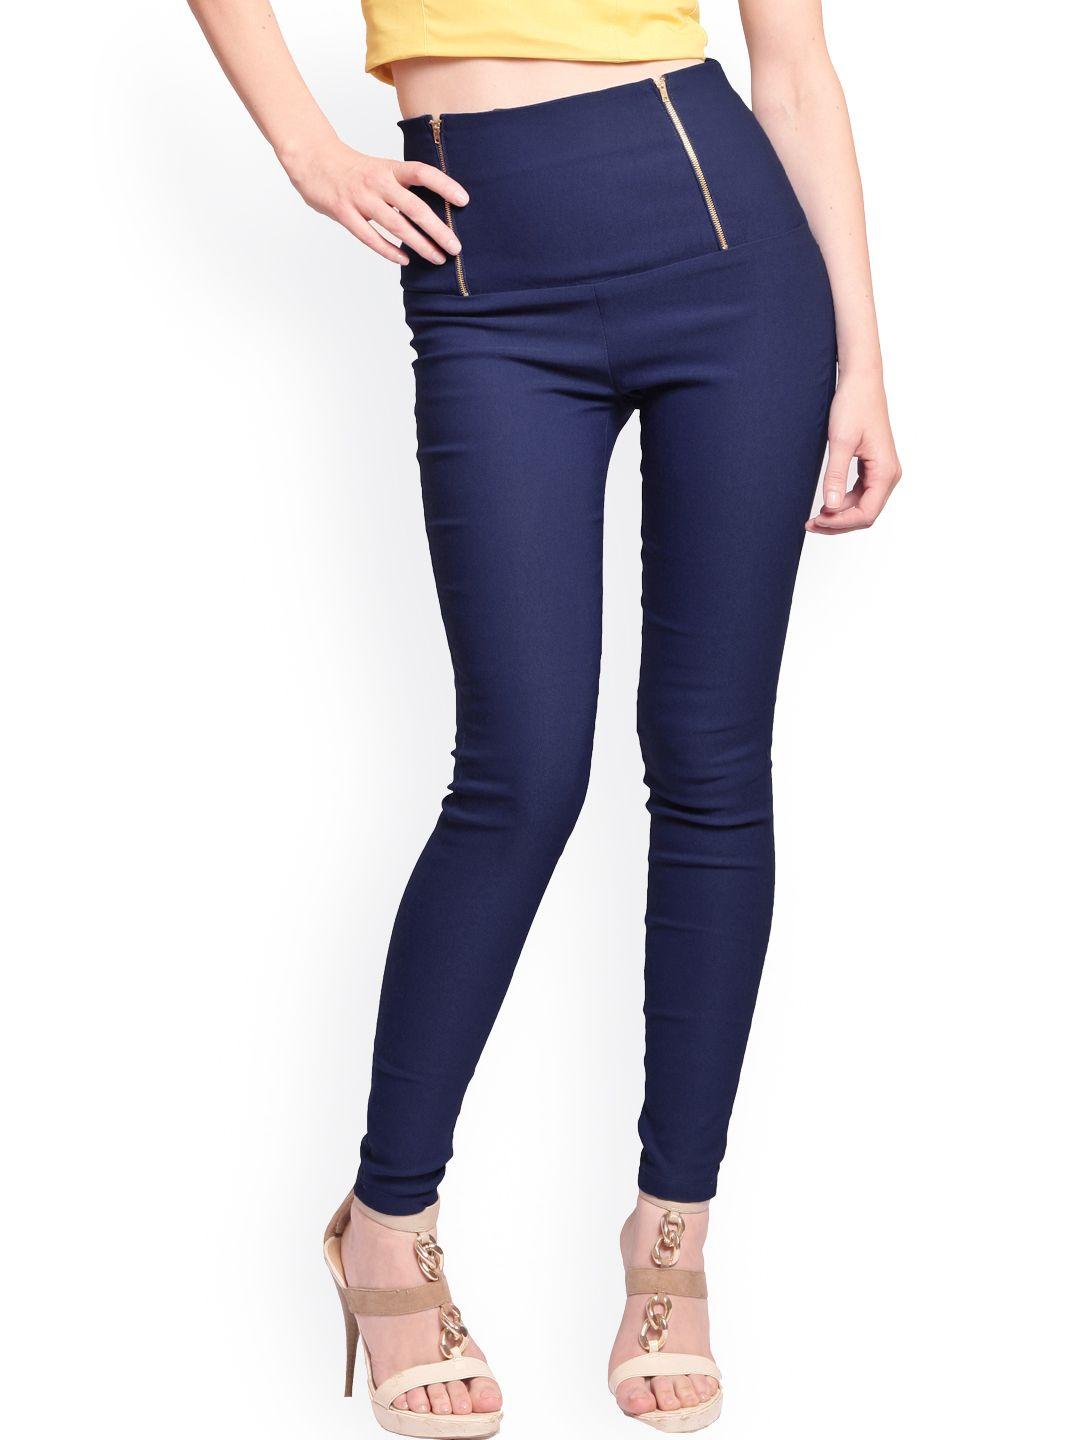 miss-chase-navy-retro-high-waist-slim-fit-jeggings